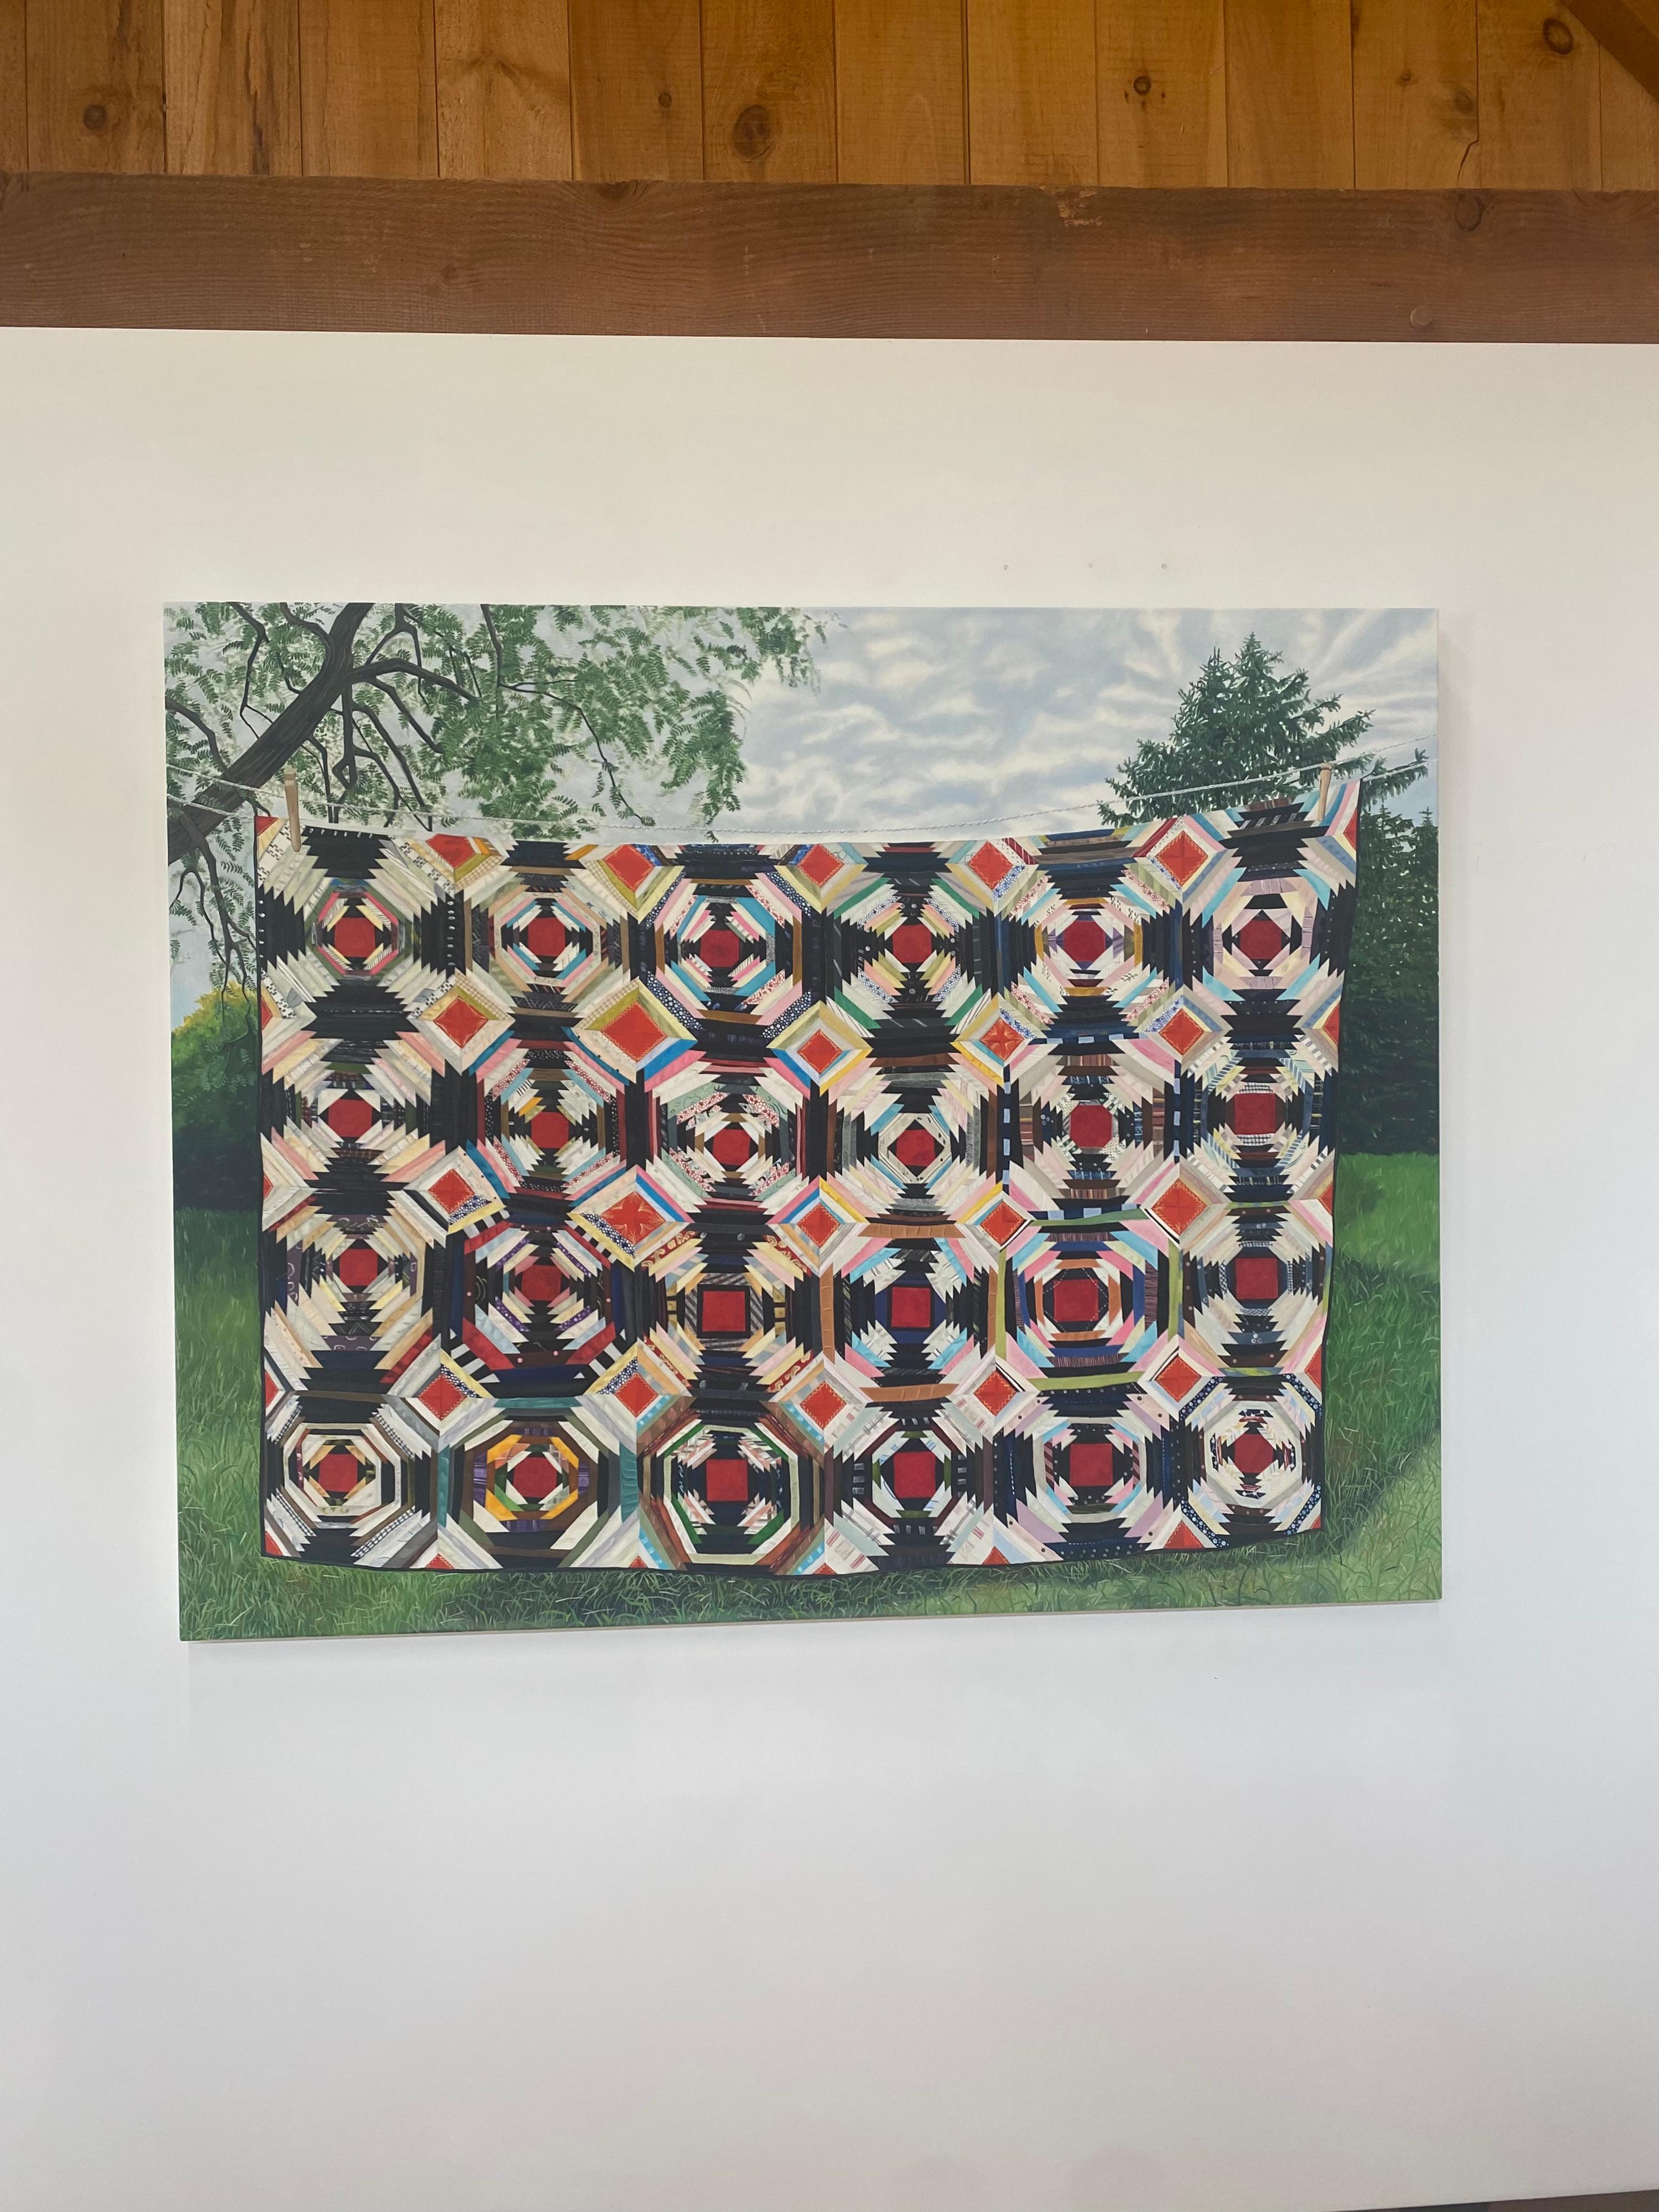 Frances Swan, Patterned Quilt, Red, Blue, Pink, Black, Green Grass Garden, Trees - Painting by Amanda Acker